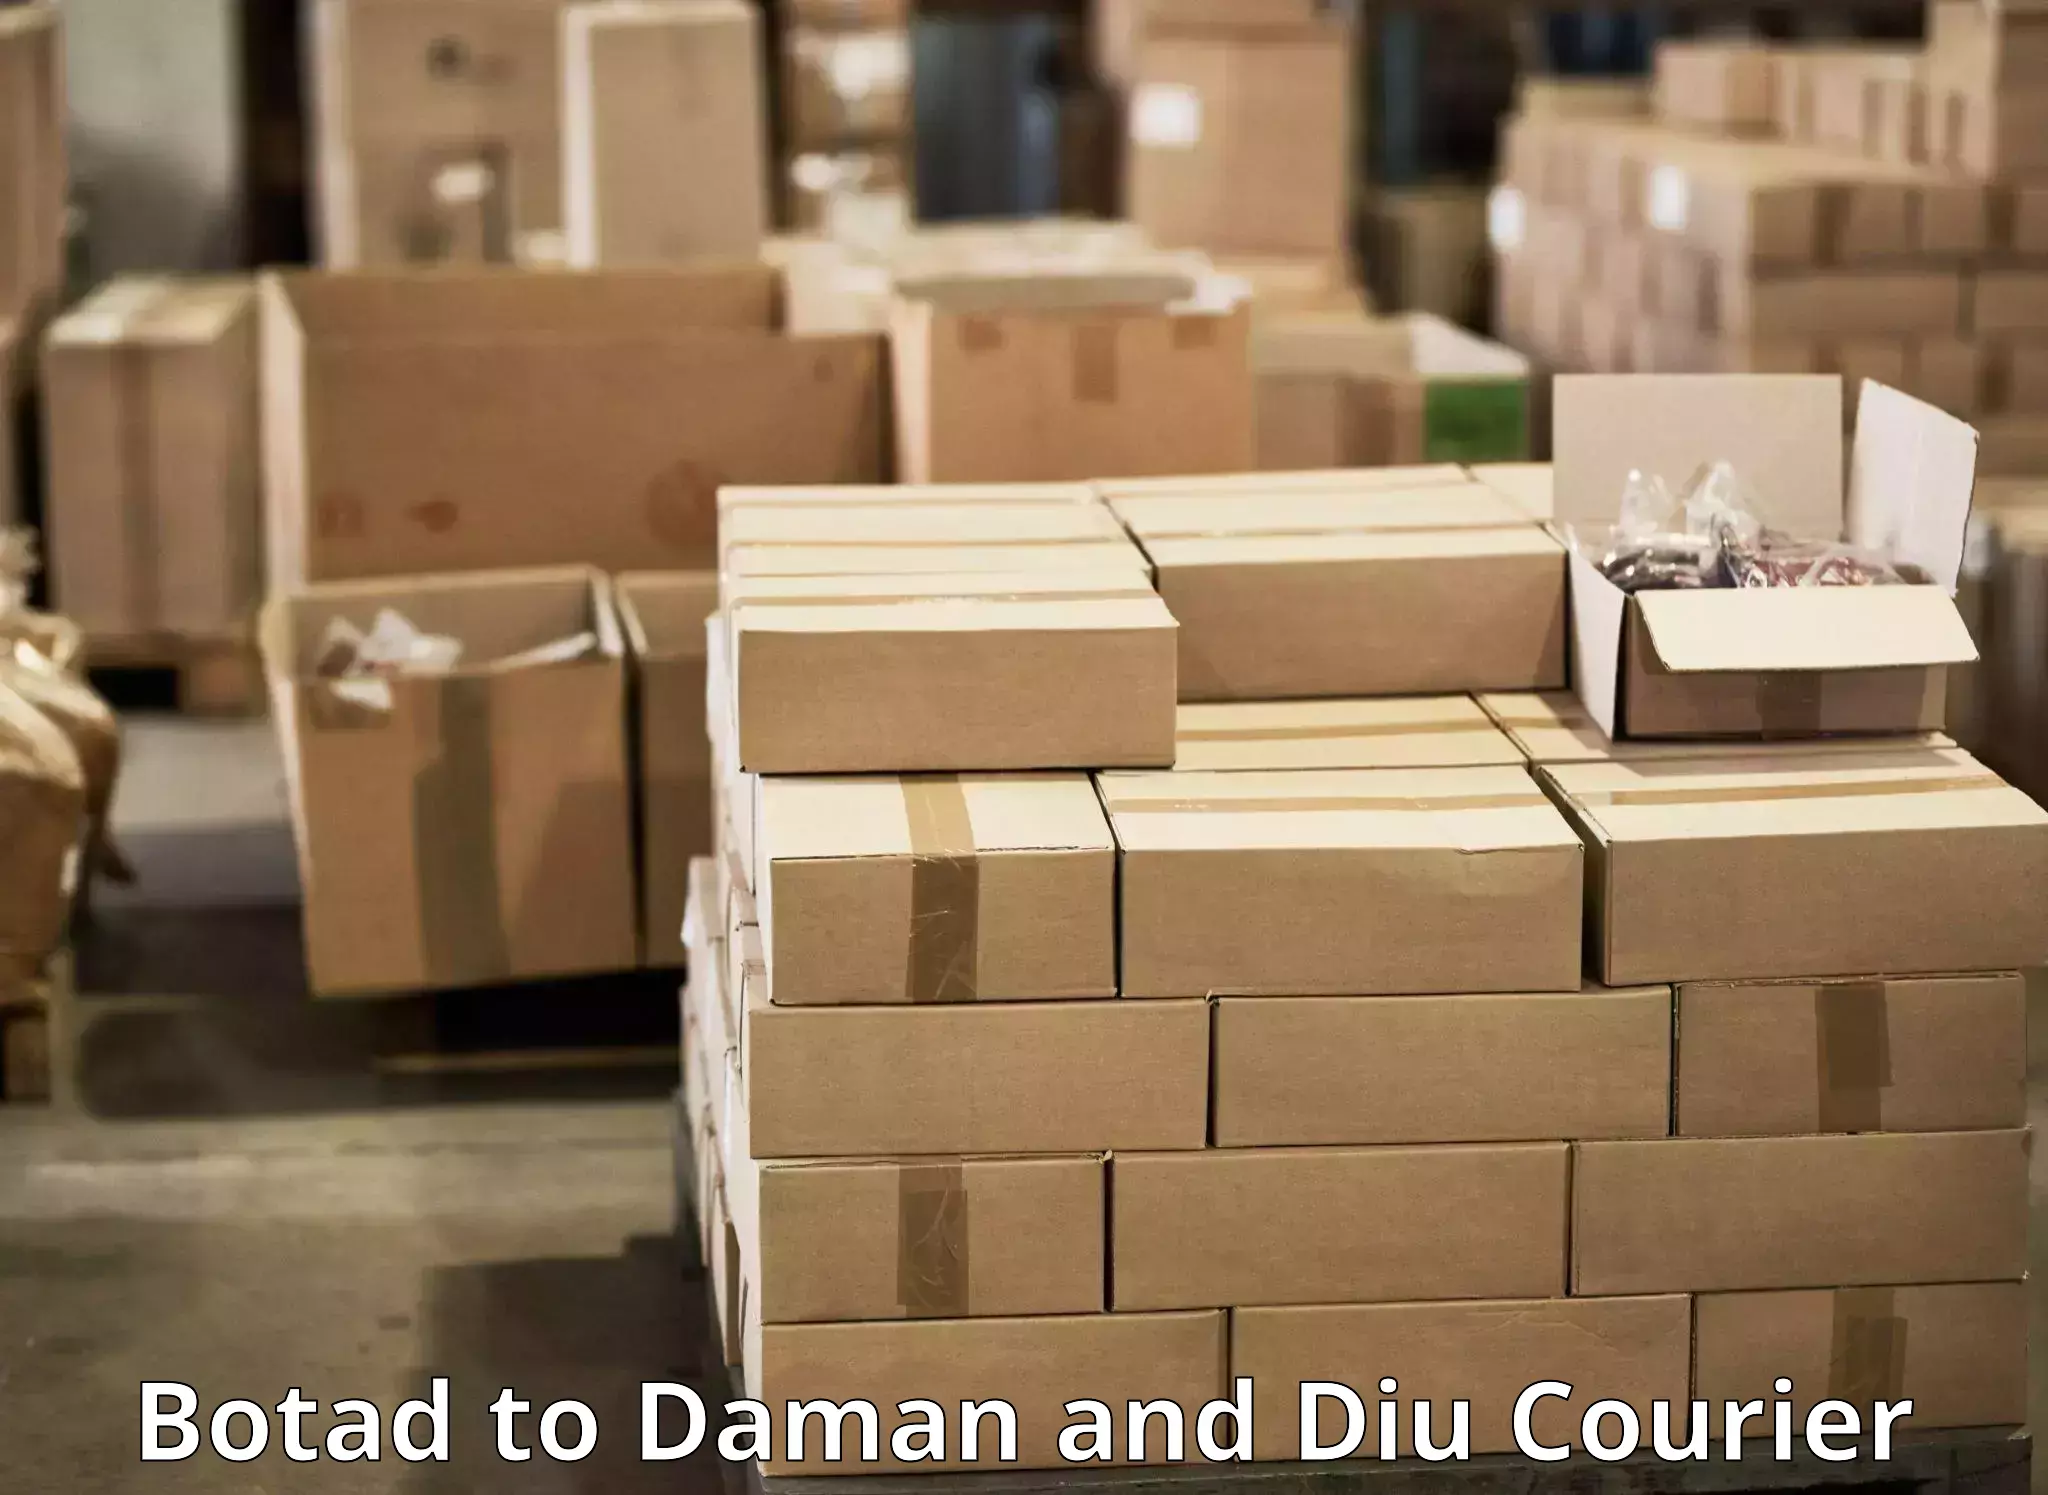 Global shipping networks in Botad to Daman and Diu